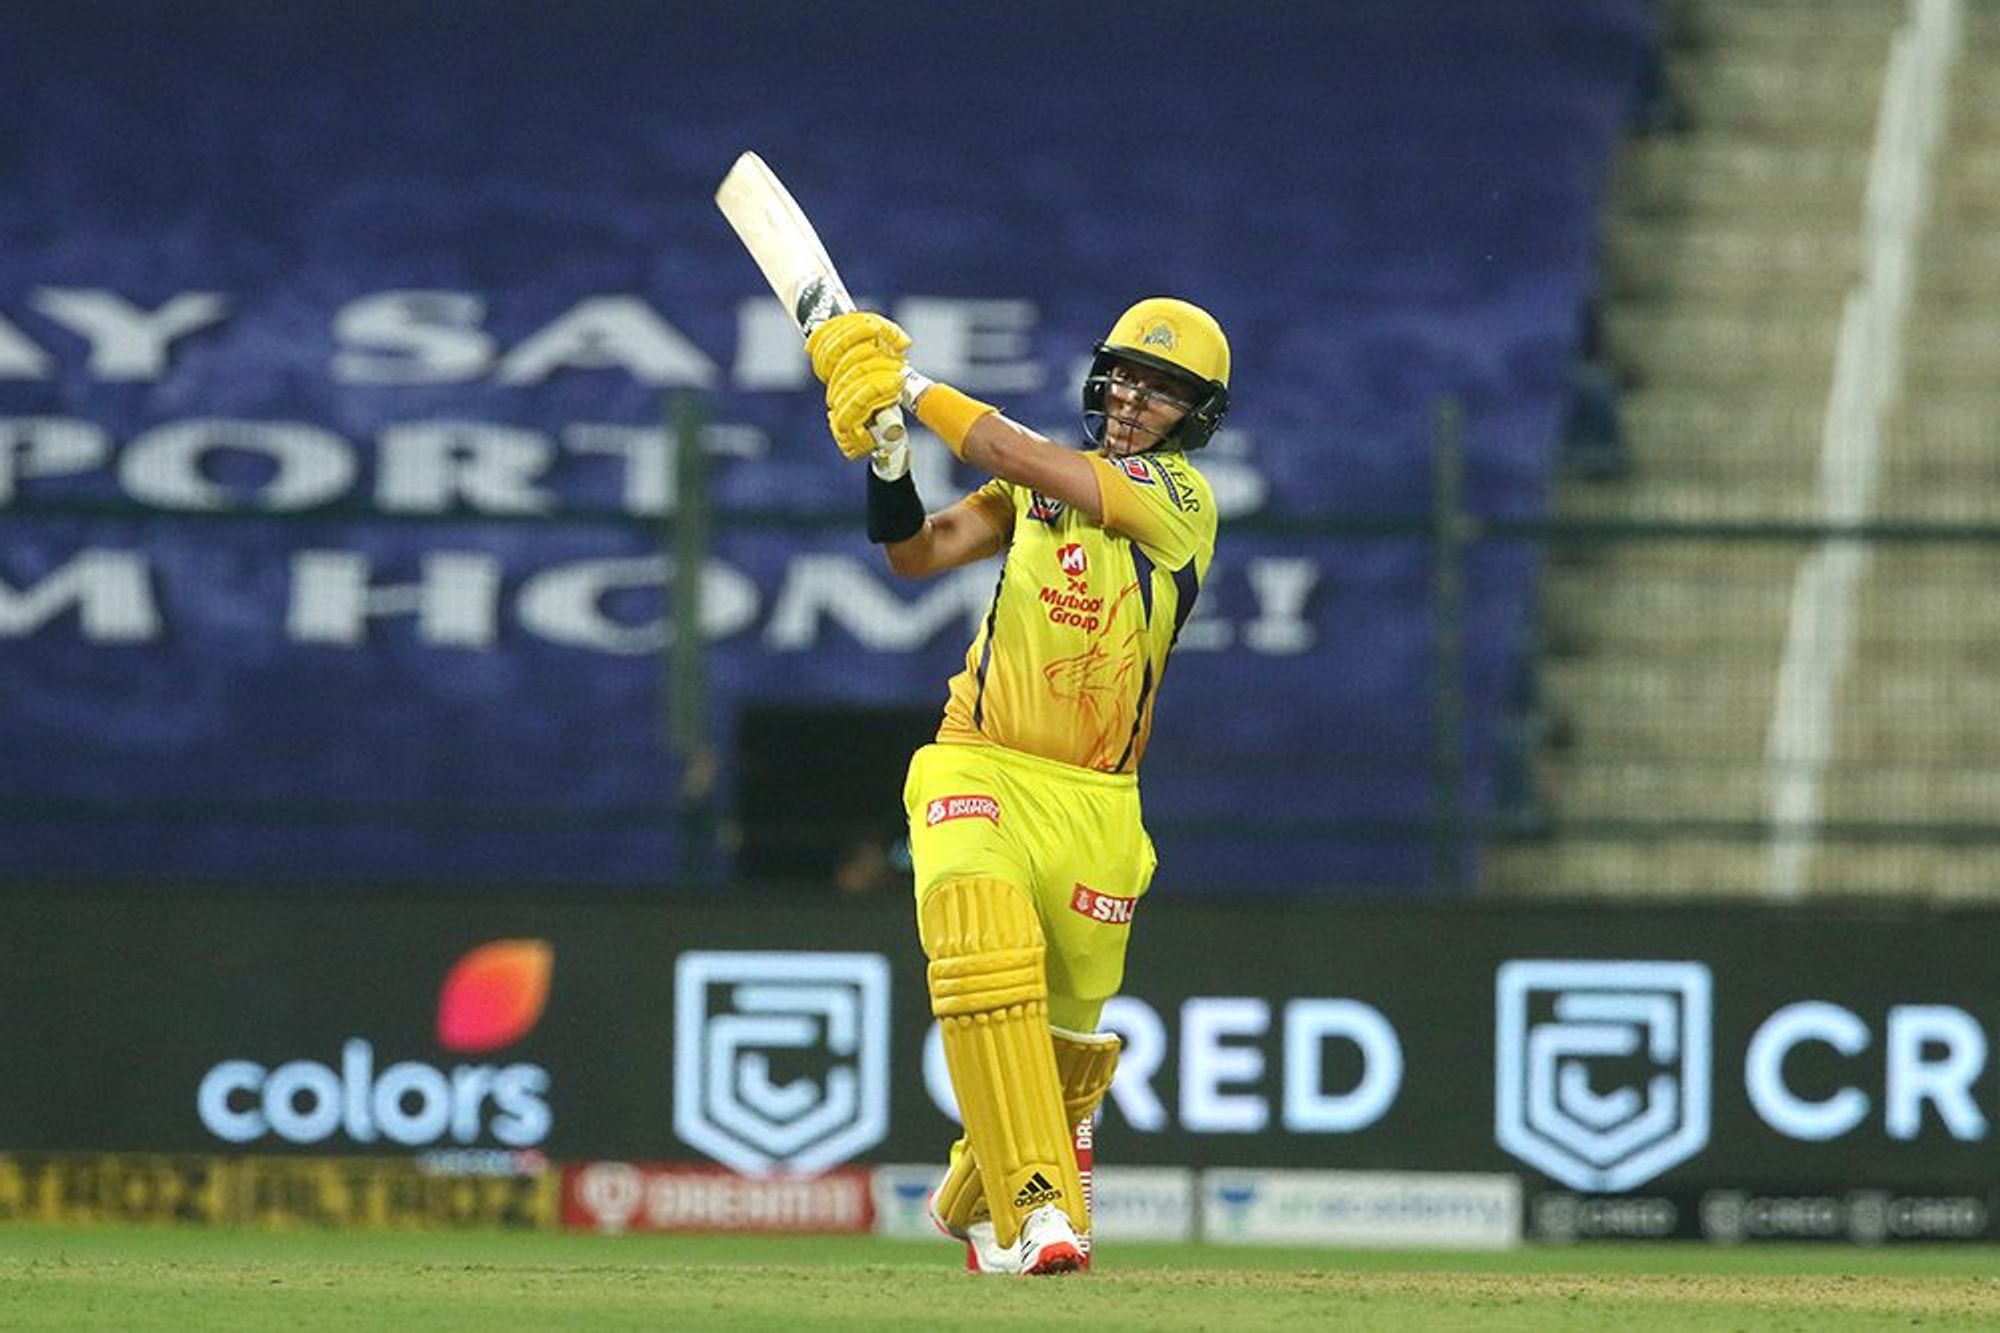 Become a Super King by 'Capitalizing' on these three bets from the DC vs CSK clash